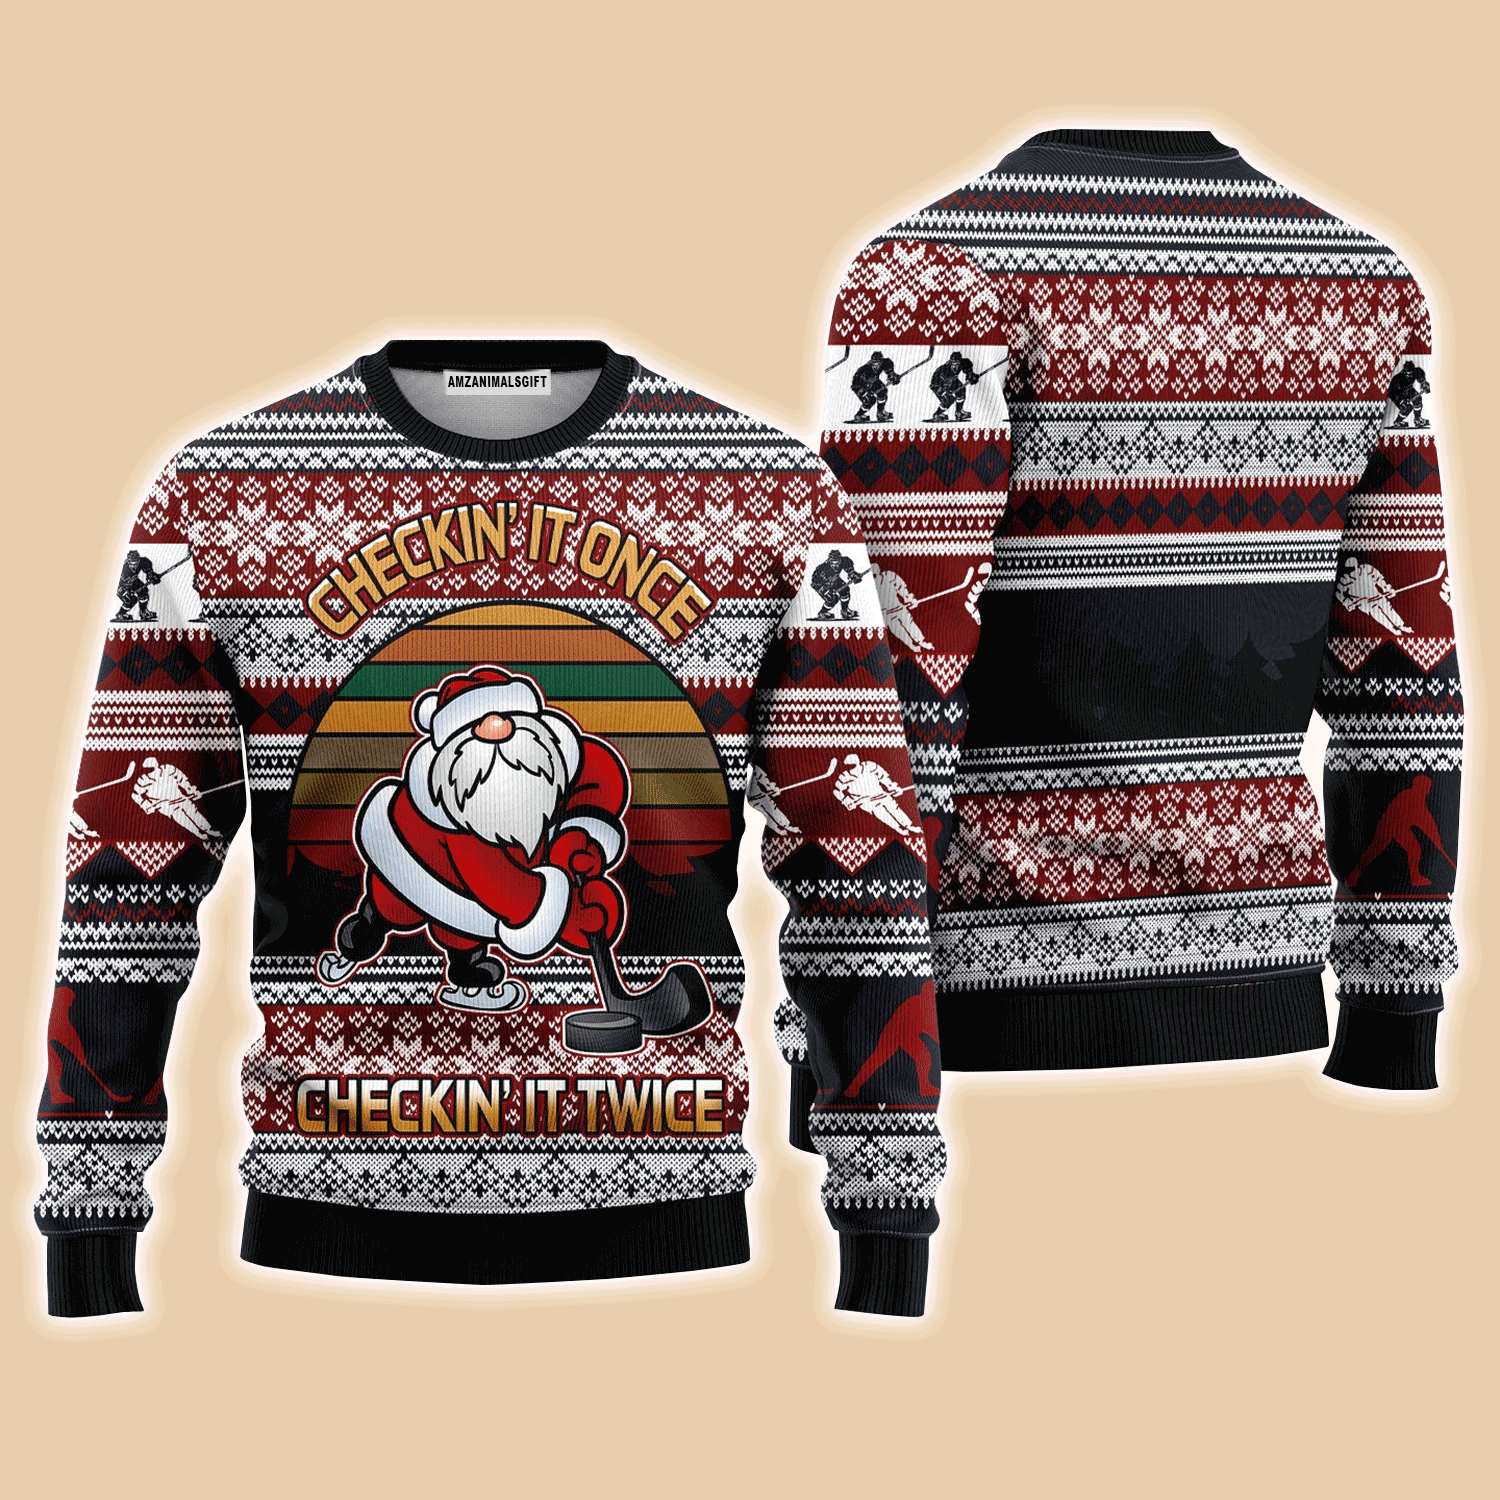 Hockey Sweater Checking It Once Checking It Twice, Ugly Sweater For Men & Women, Perfect Outfit For Christmas New Year Autumn Winter